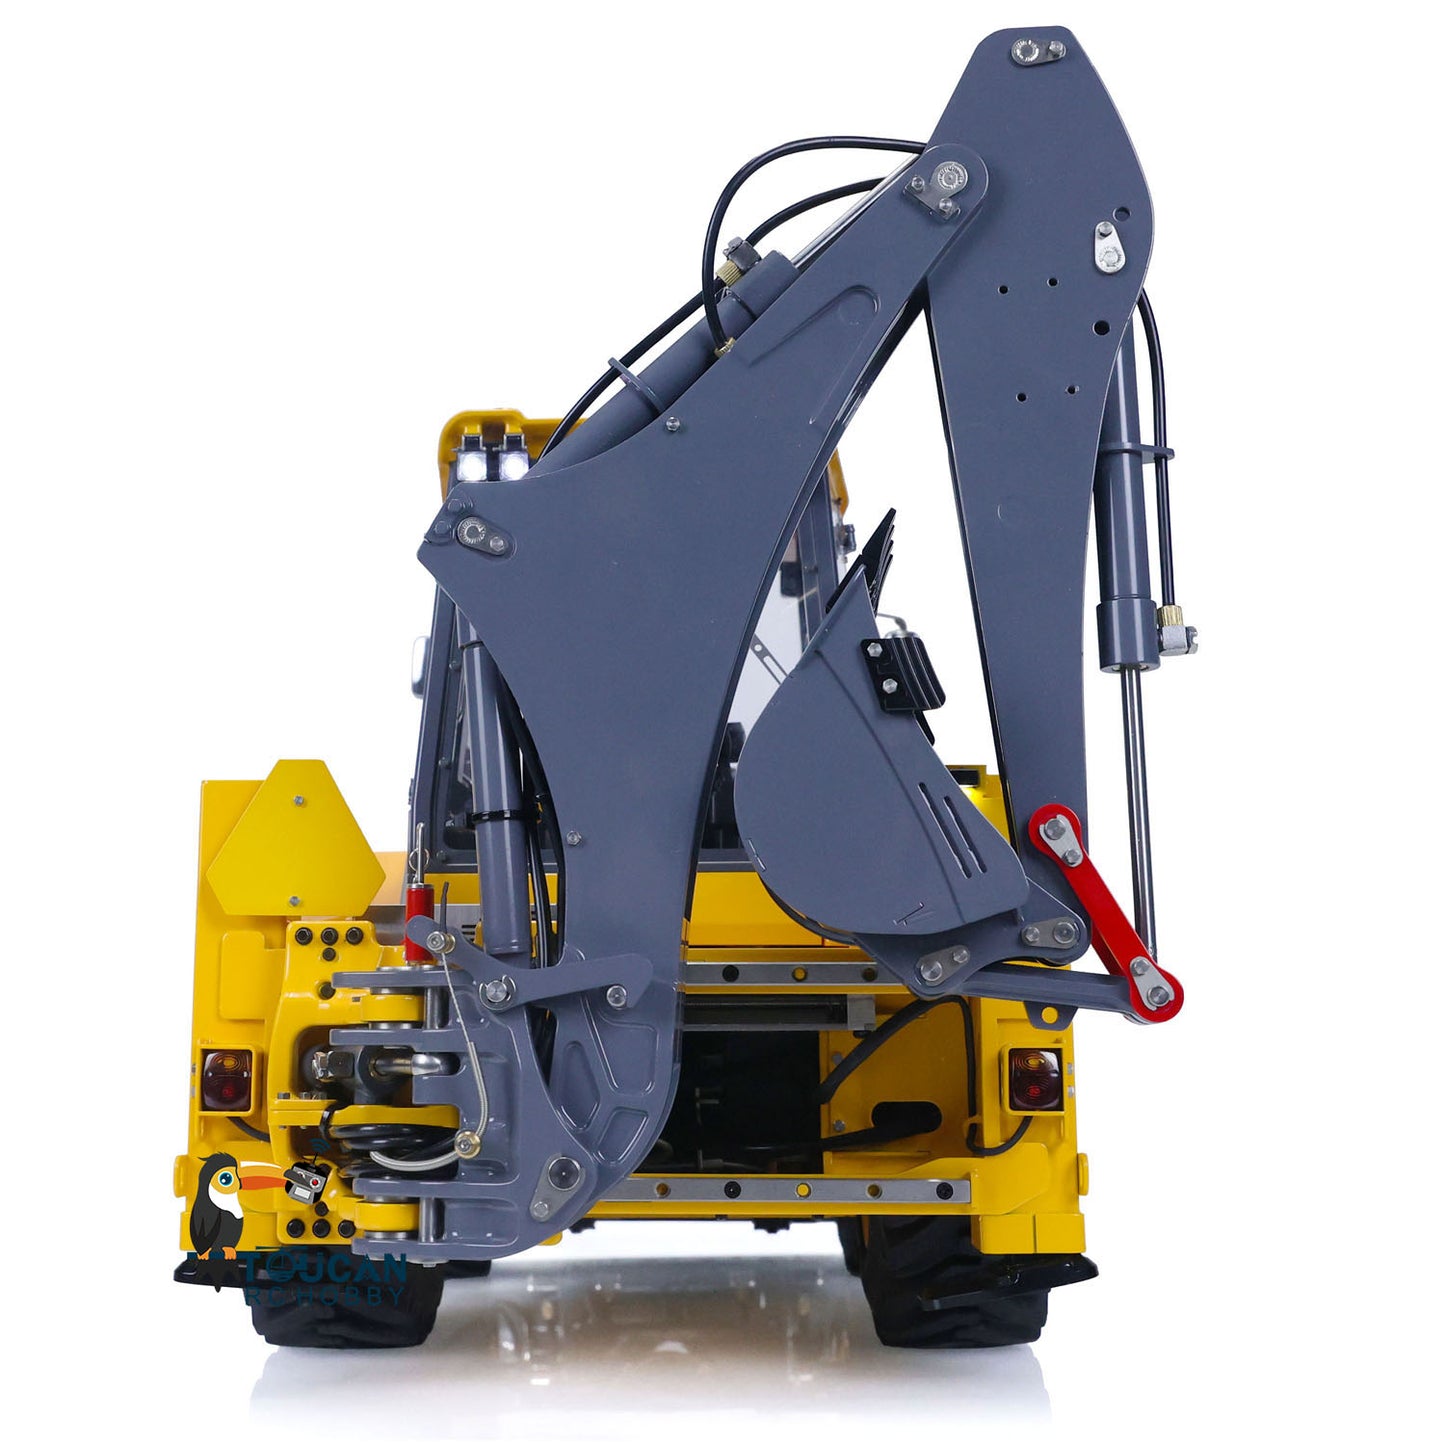 LESU 1/14 Metal Hydraulic RC Backhoe Loader AOUE BL71 2 in 1 Electric Excavator Ready To Run Version Battery Light Sound Sytem